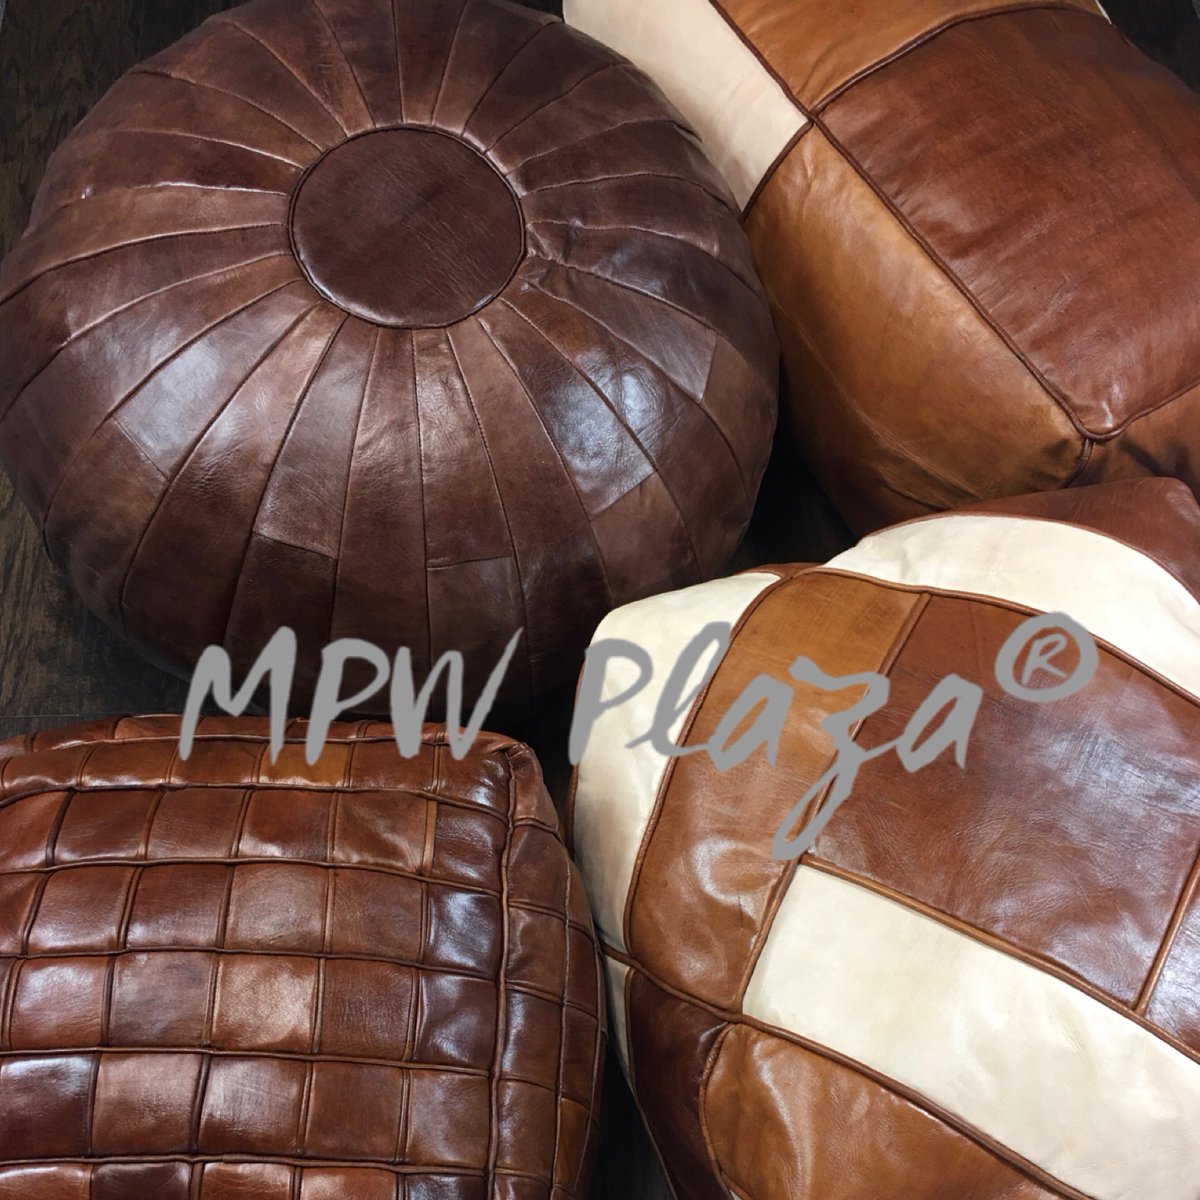 🌷 Treat yourself to a Premium MPW Plaza Moroccan Pouf 🌺  ships from USA 🌹
#luxuryhouses #luxurylifestyles #luxurygirl #luxurylivingroom #luxurystyle #luxuryapartments #luxuryshopping #luxuryshoes #luxurybags #luxurycollection #luxurycondos #luxurymansion #luxuryproperty